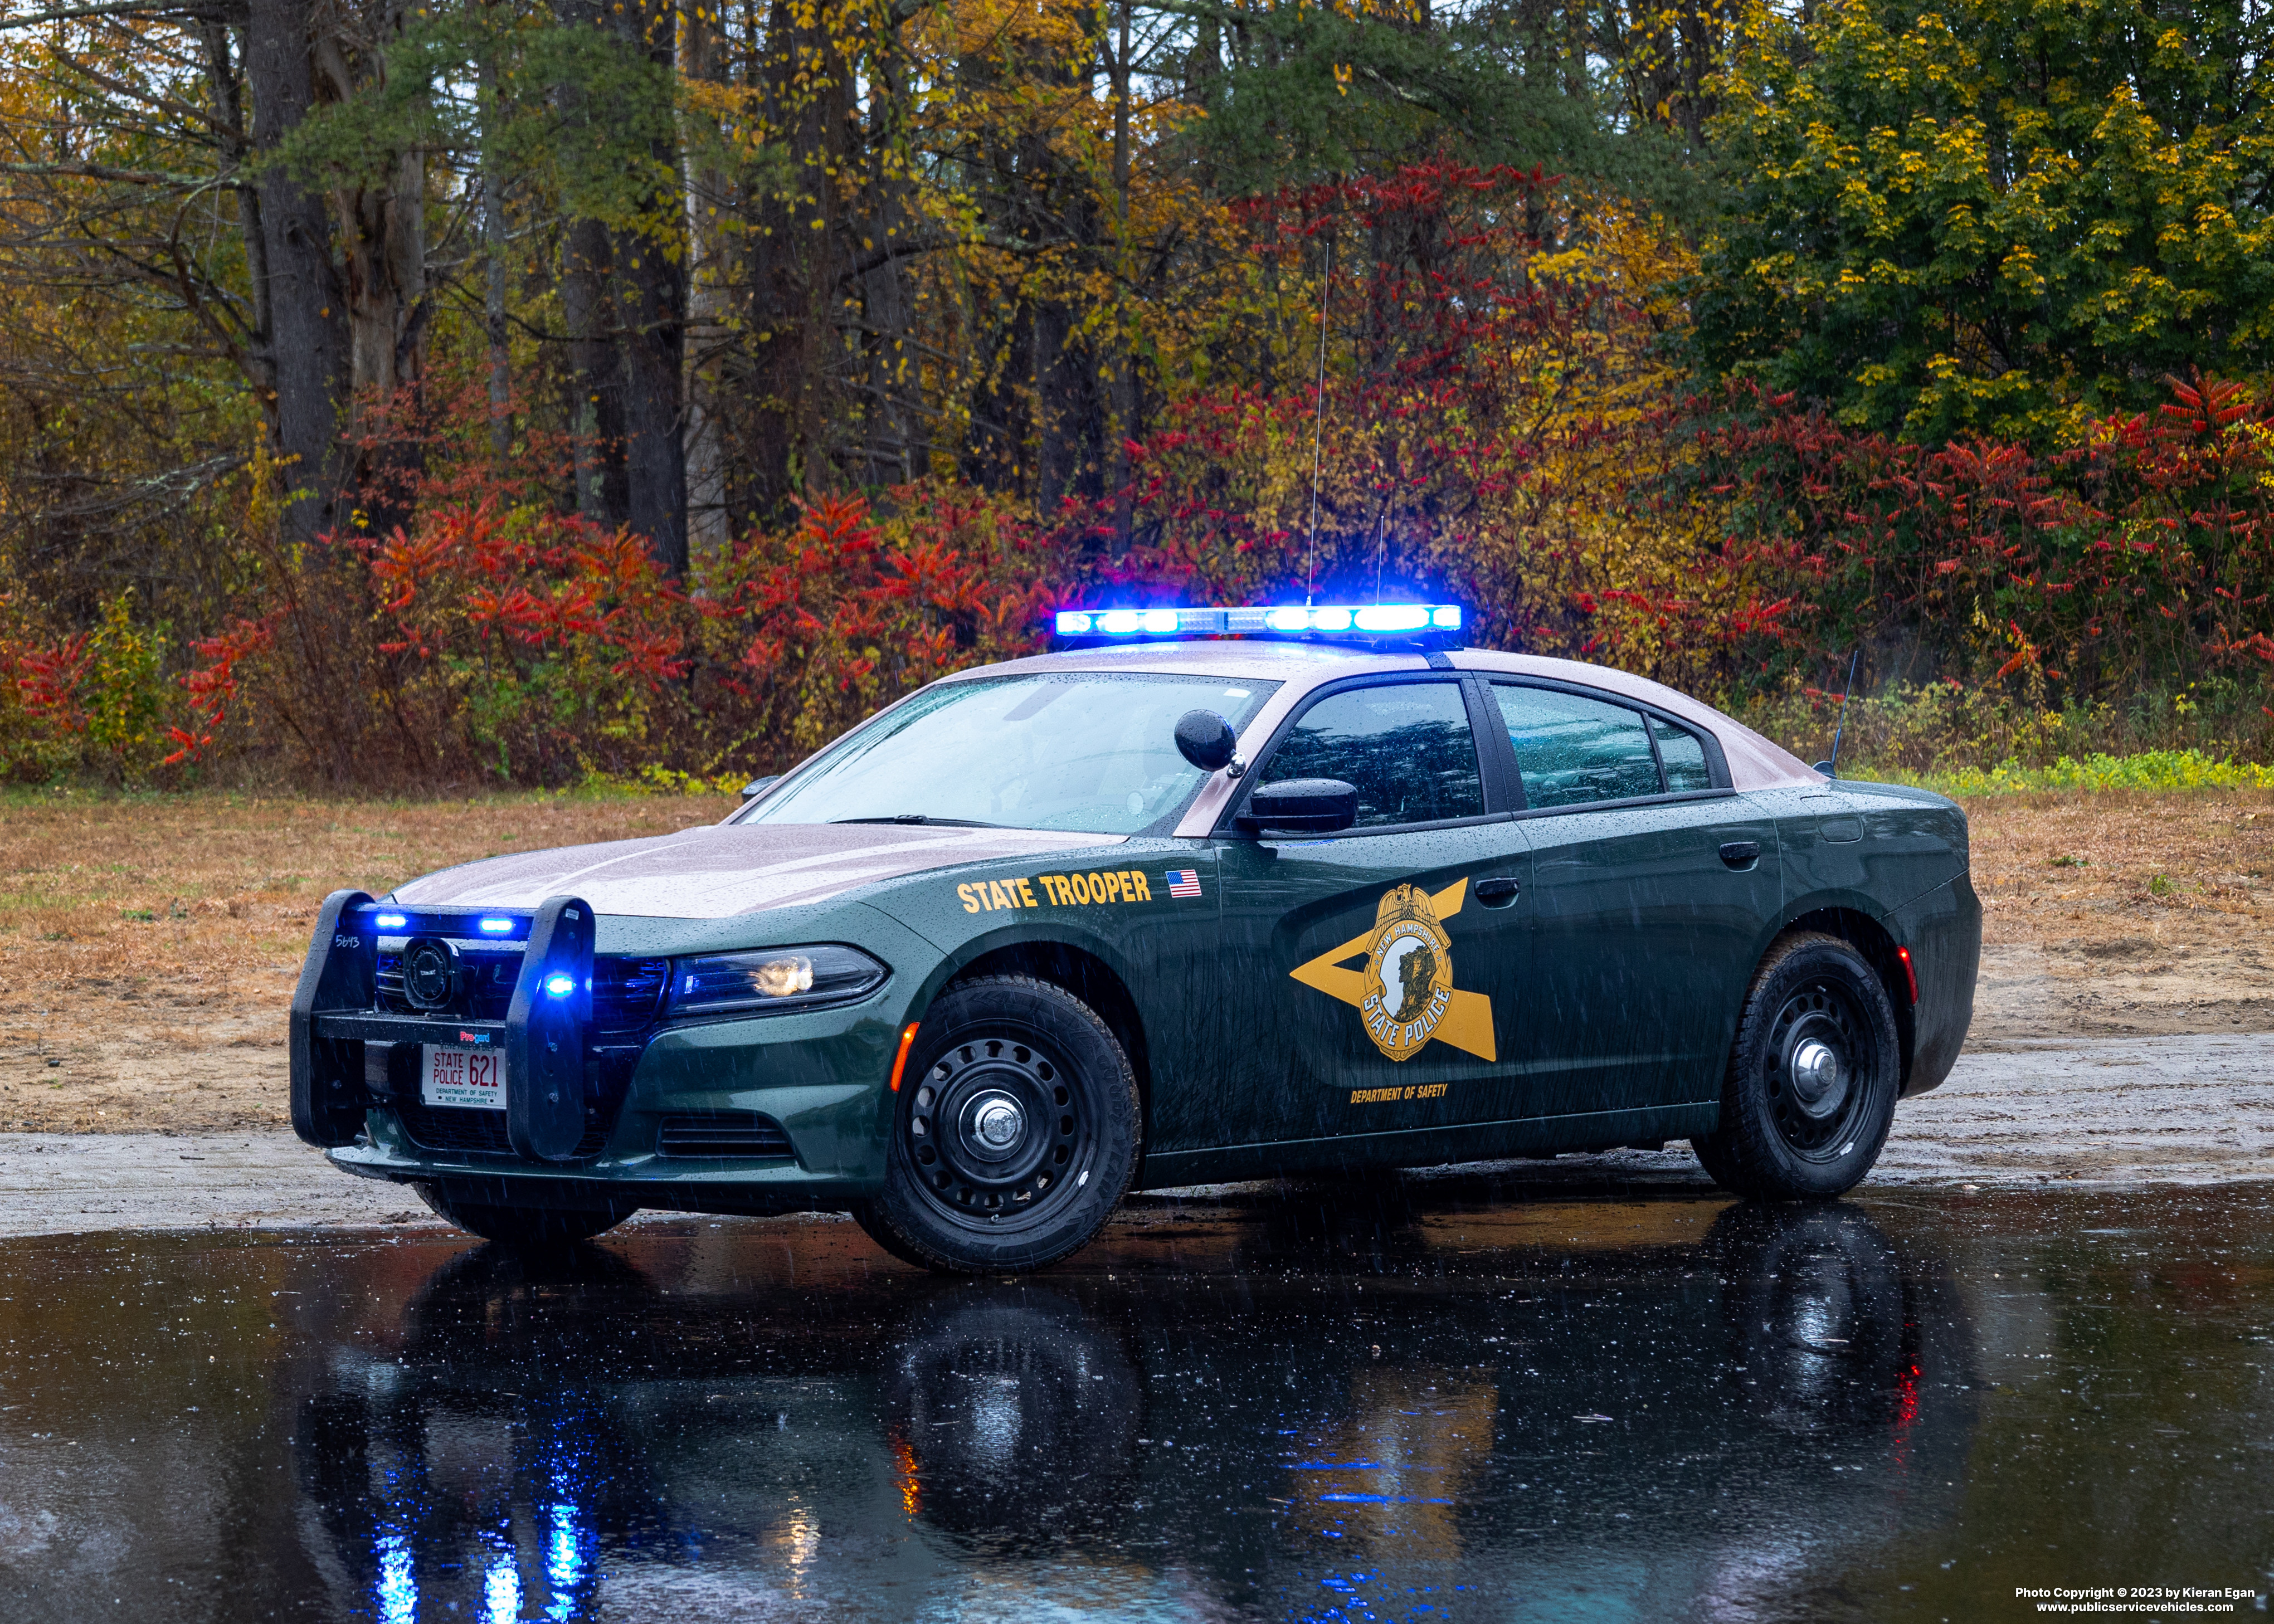 A photo  of New Hampshire State Police
            Cruiser 621, a 2022 Dodge Charger             taken by Kieran Egan